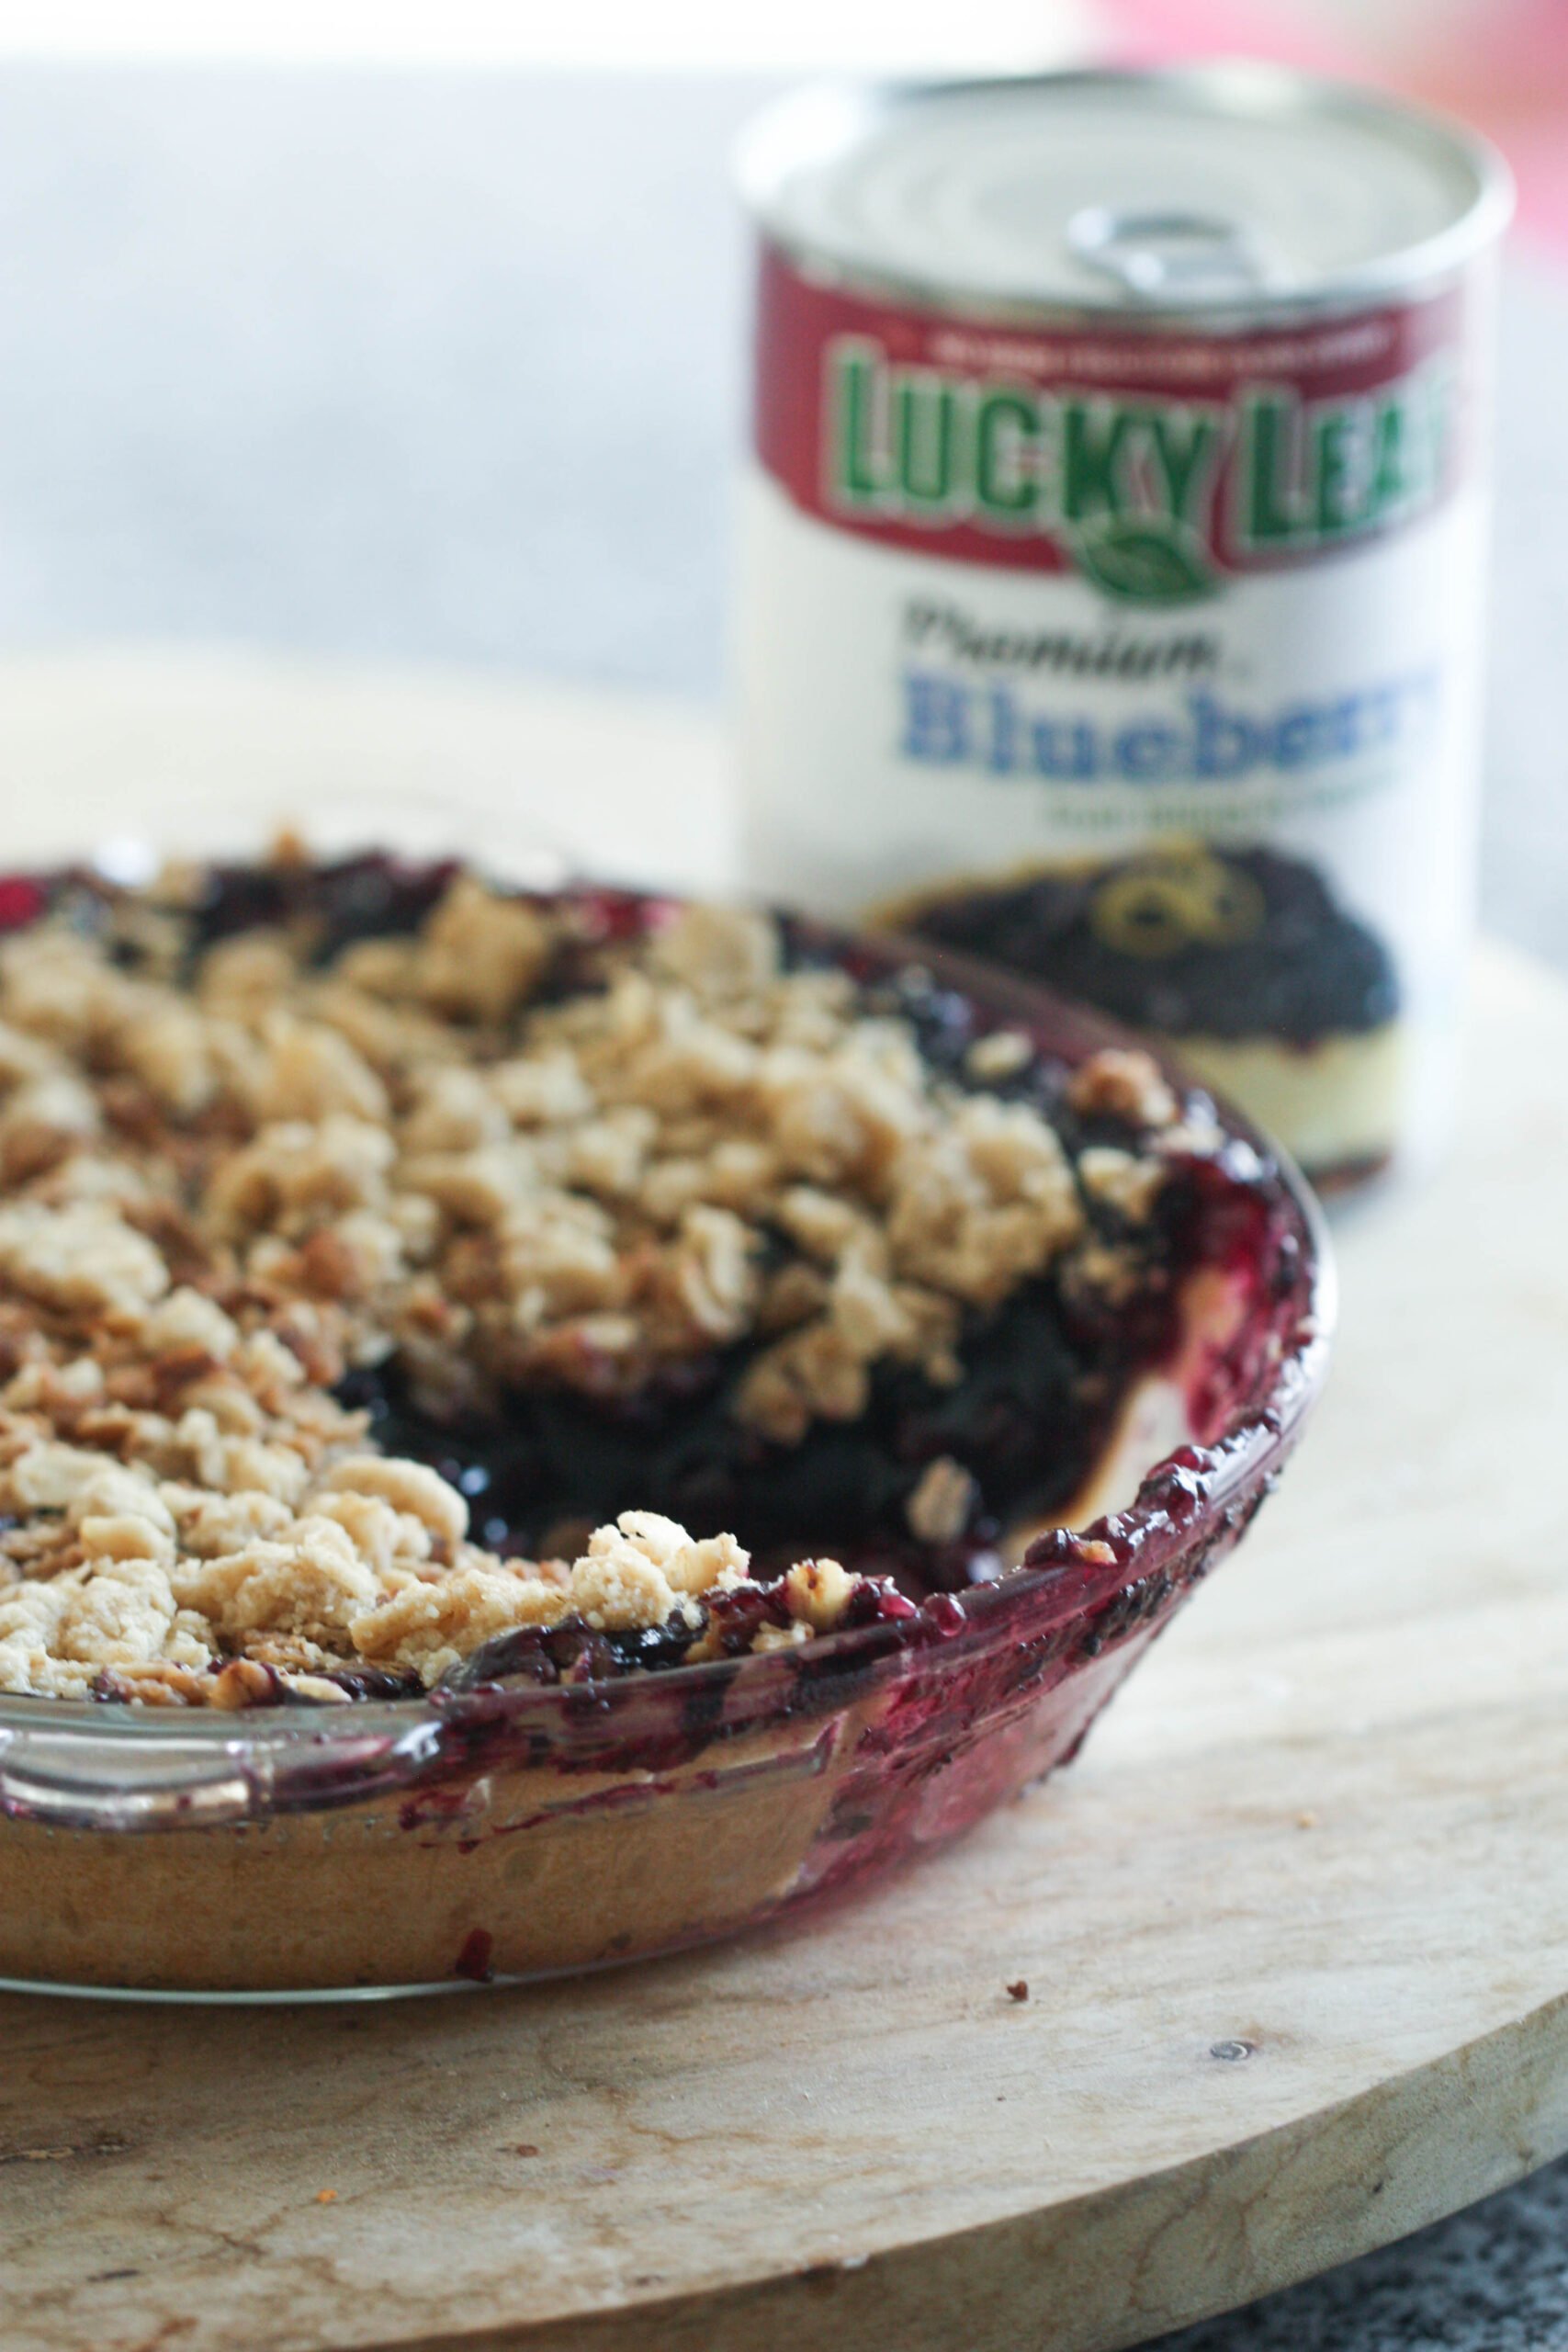 Blueberry Crumble Pie Recipe with Lucky Leaf Pie Filling